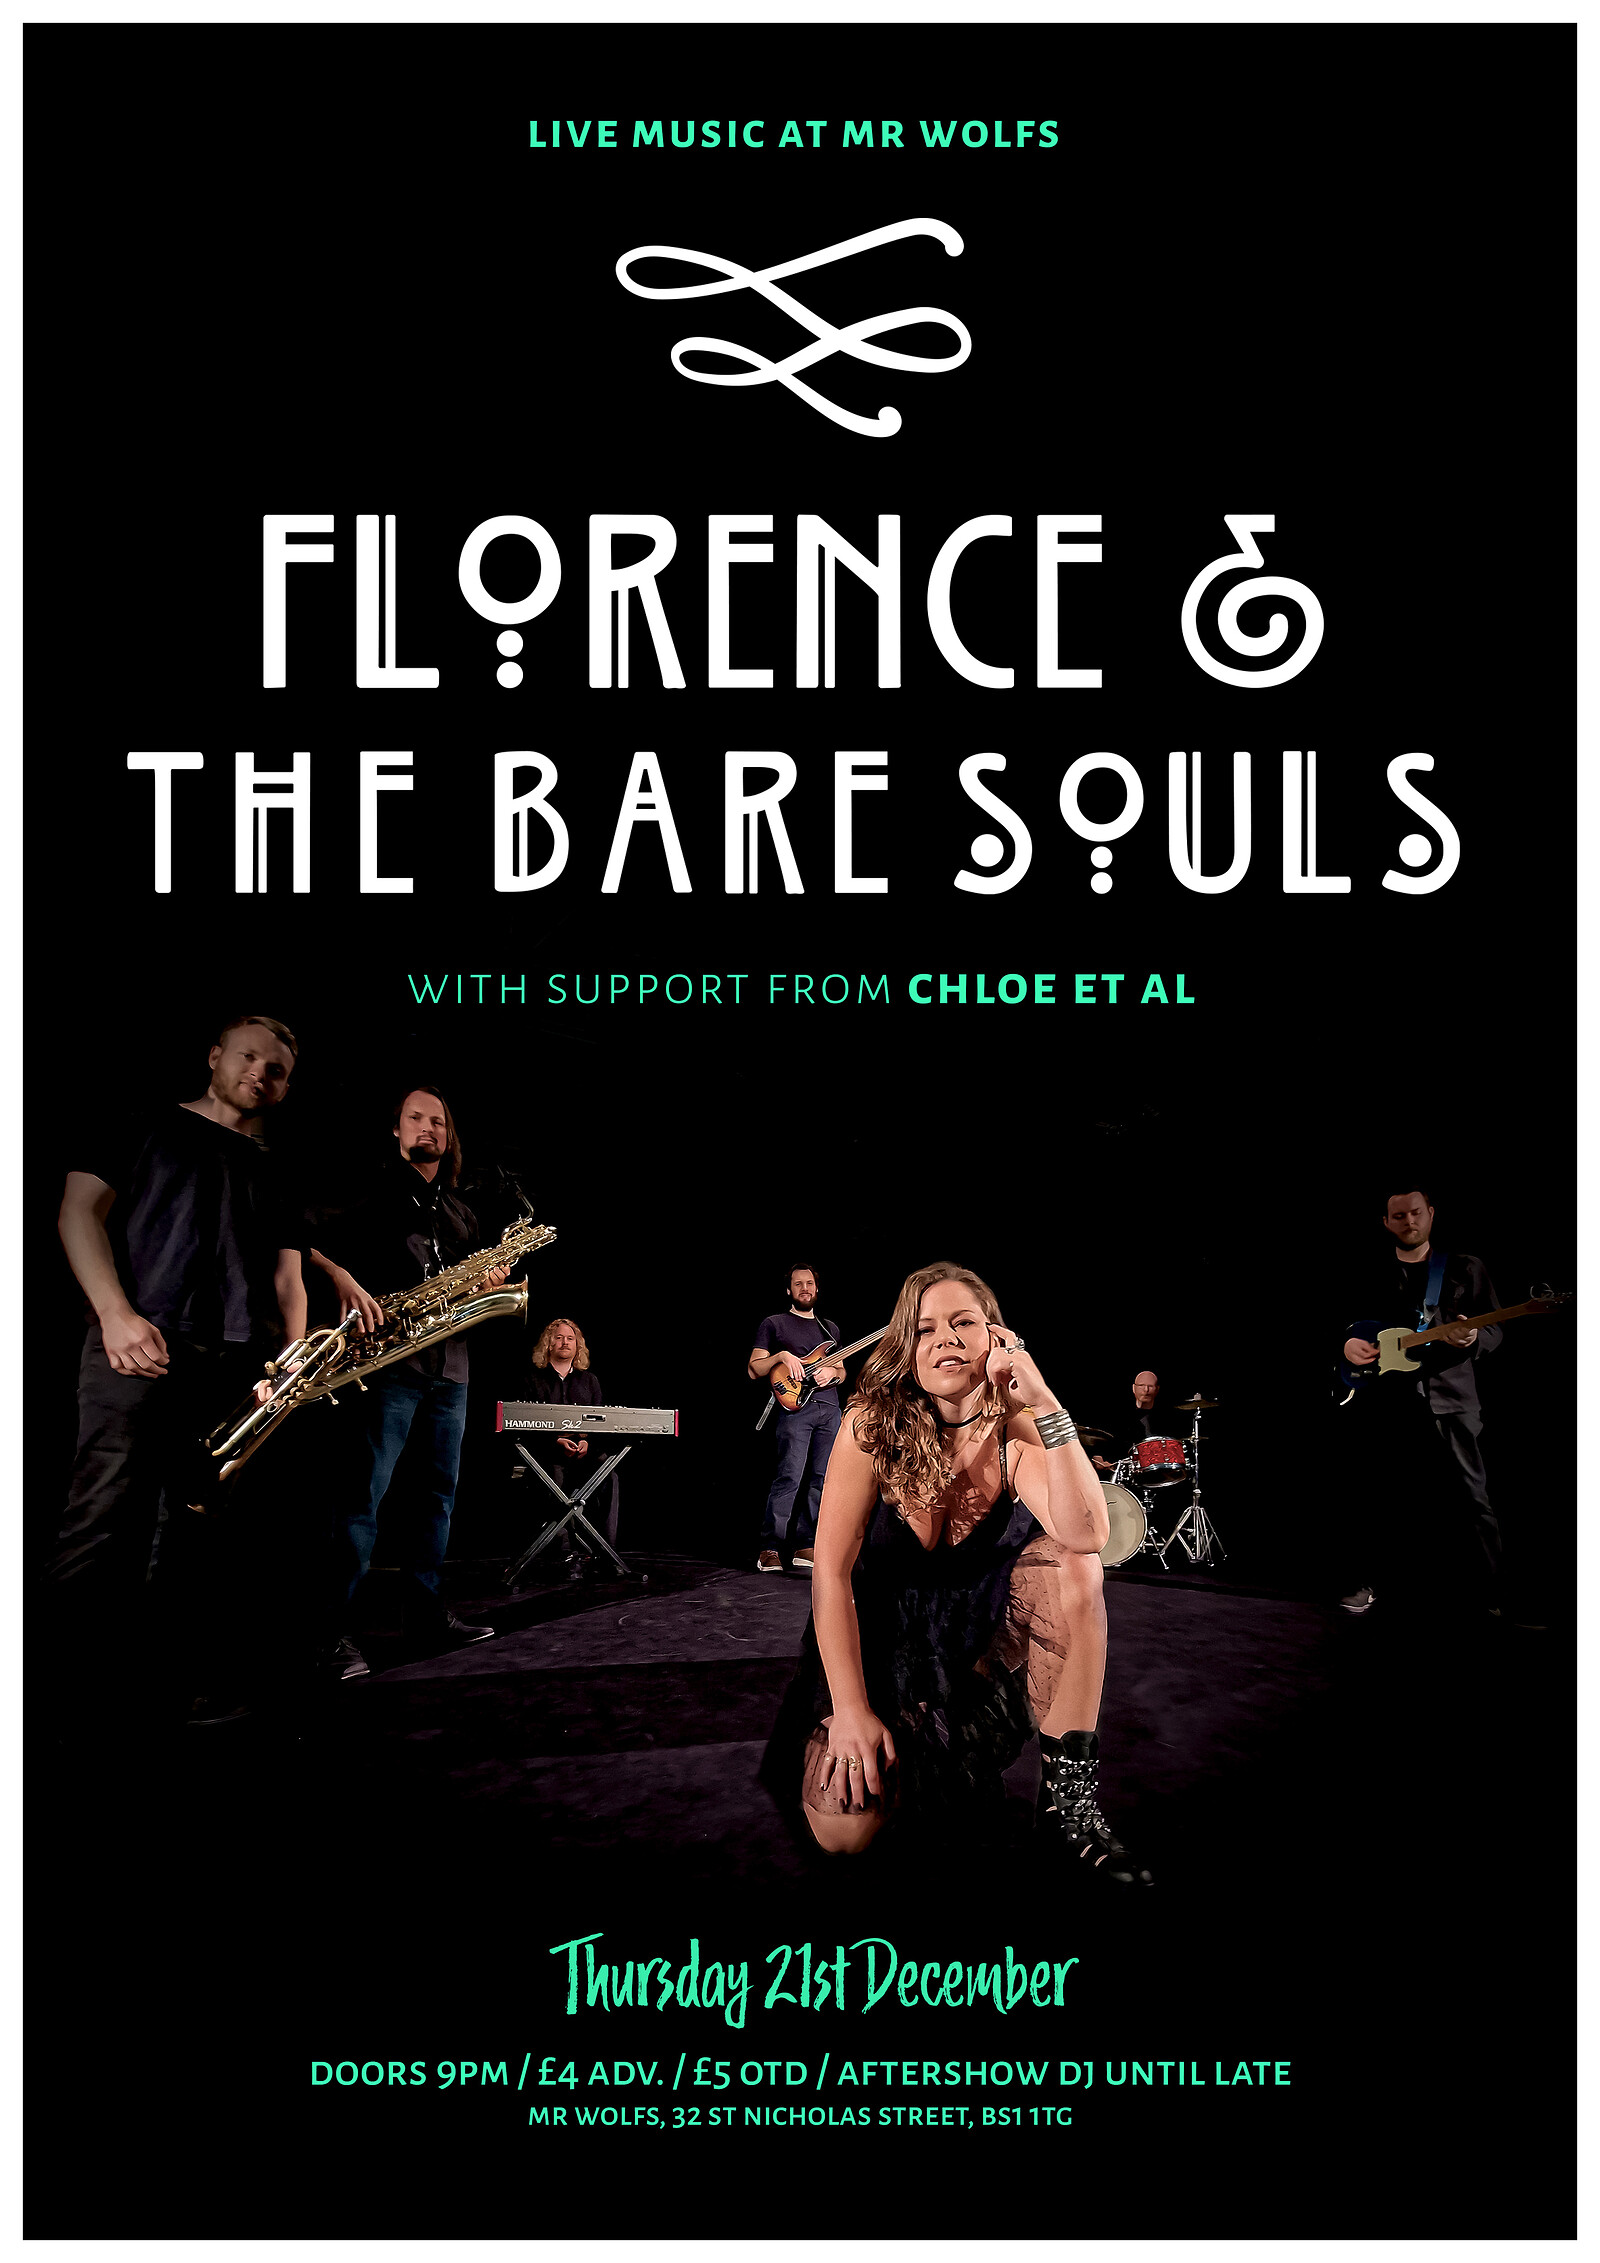 Florence & The Bare Souls + Chloe At Al at Mr Wolfs